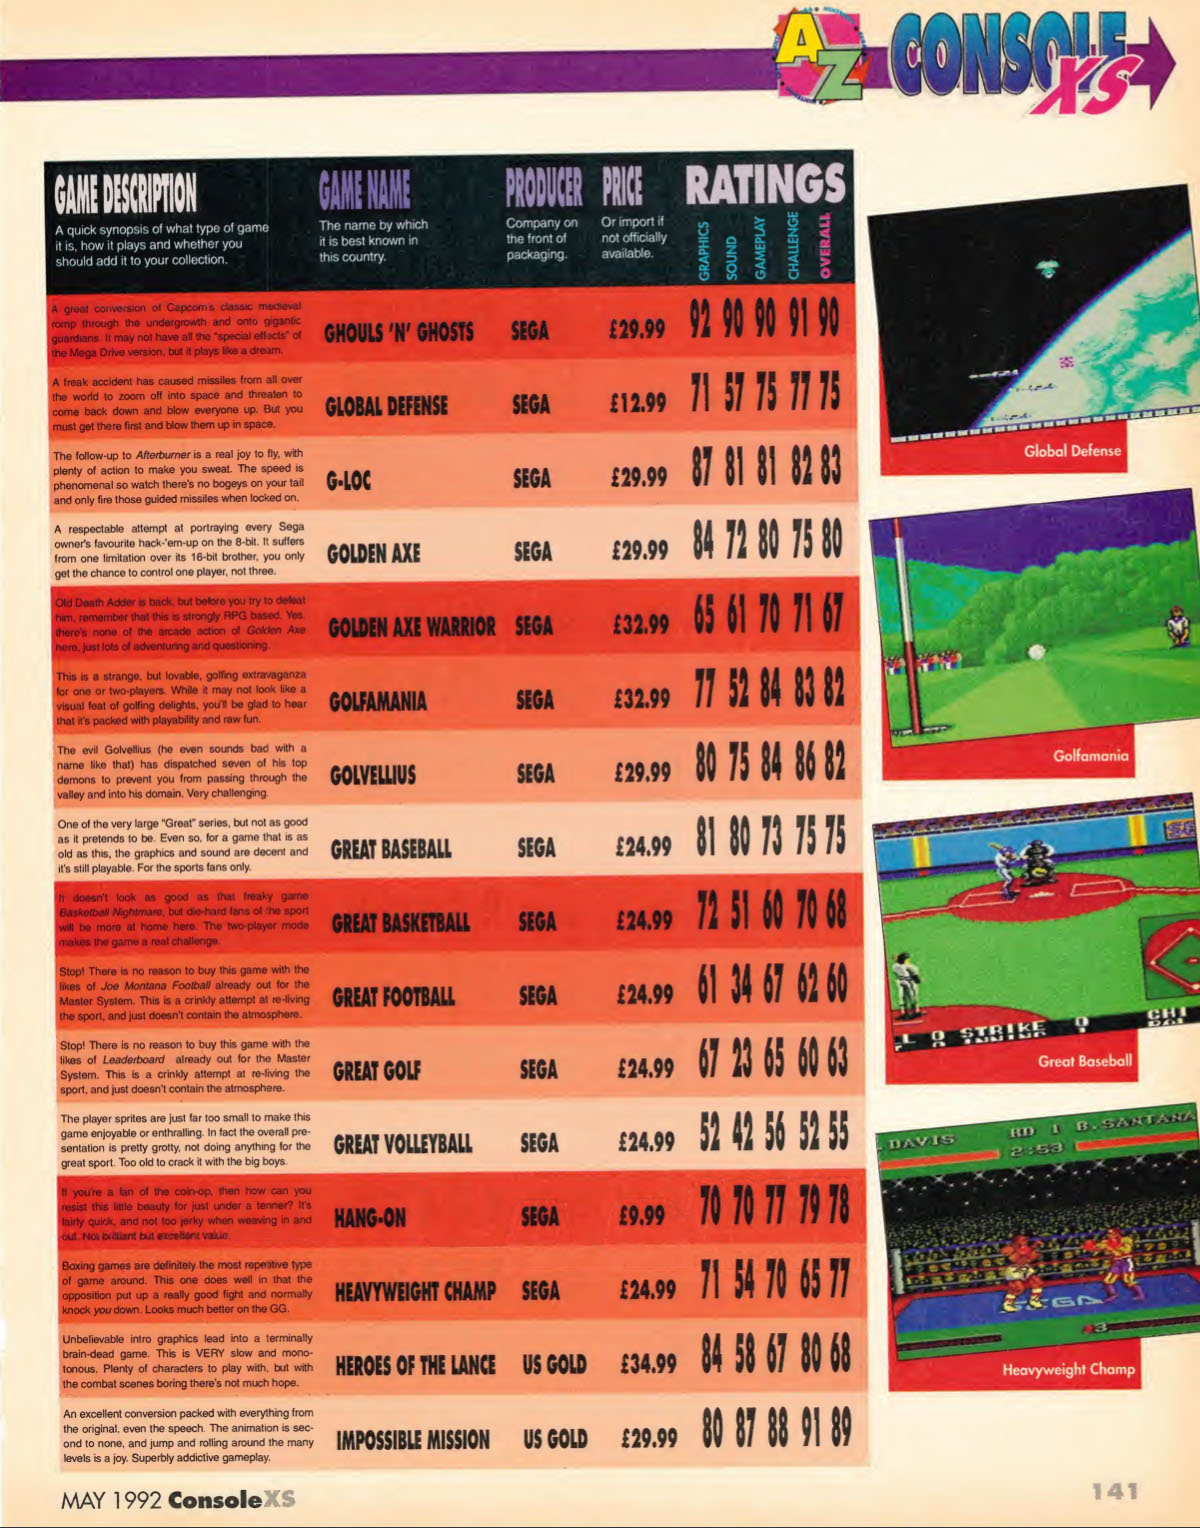 Great Baseball Review, Console XS May 1992 page 141